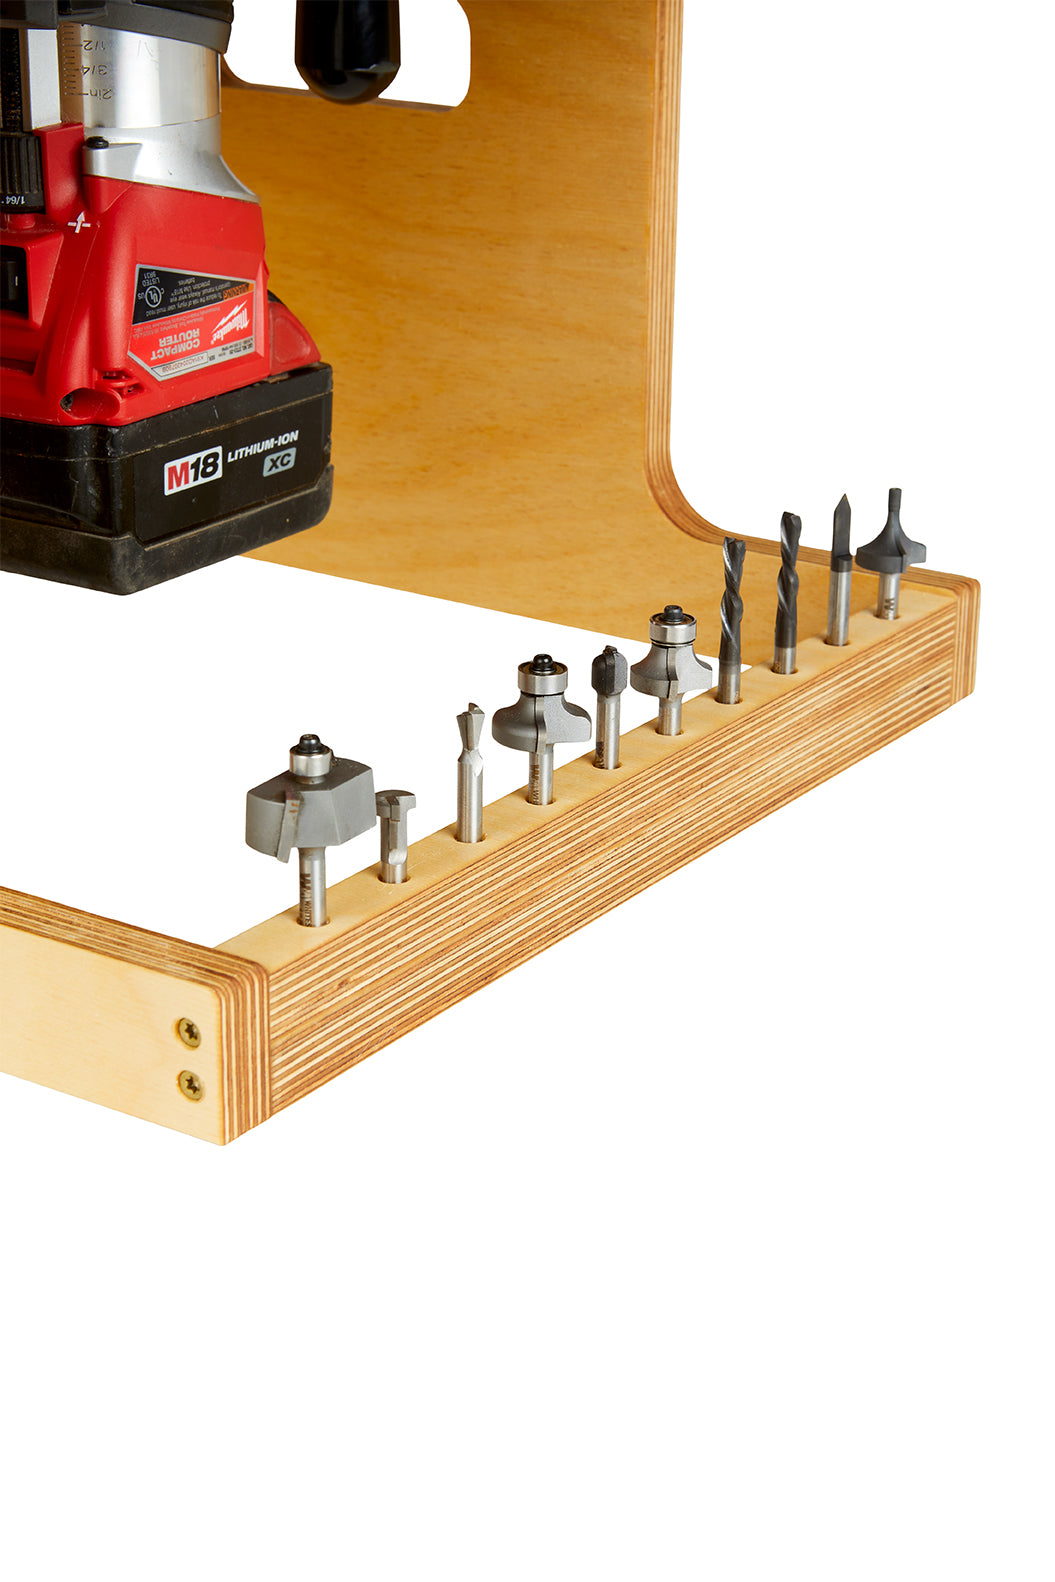 KM Tools Benchtop Router Table for 3x3 Custom Trim Router Jig